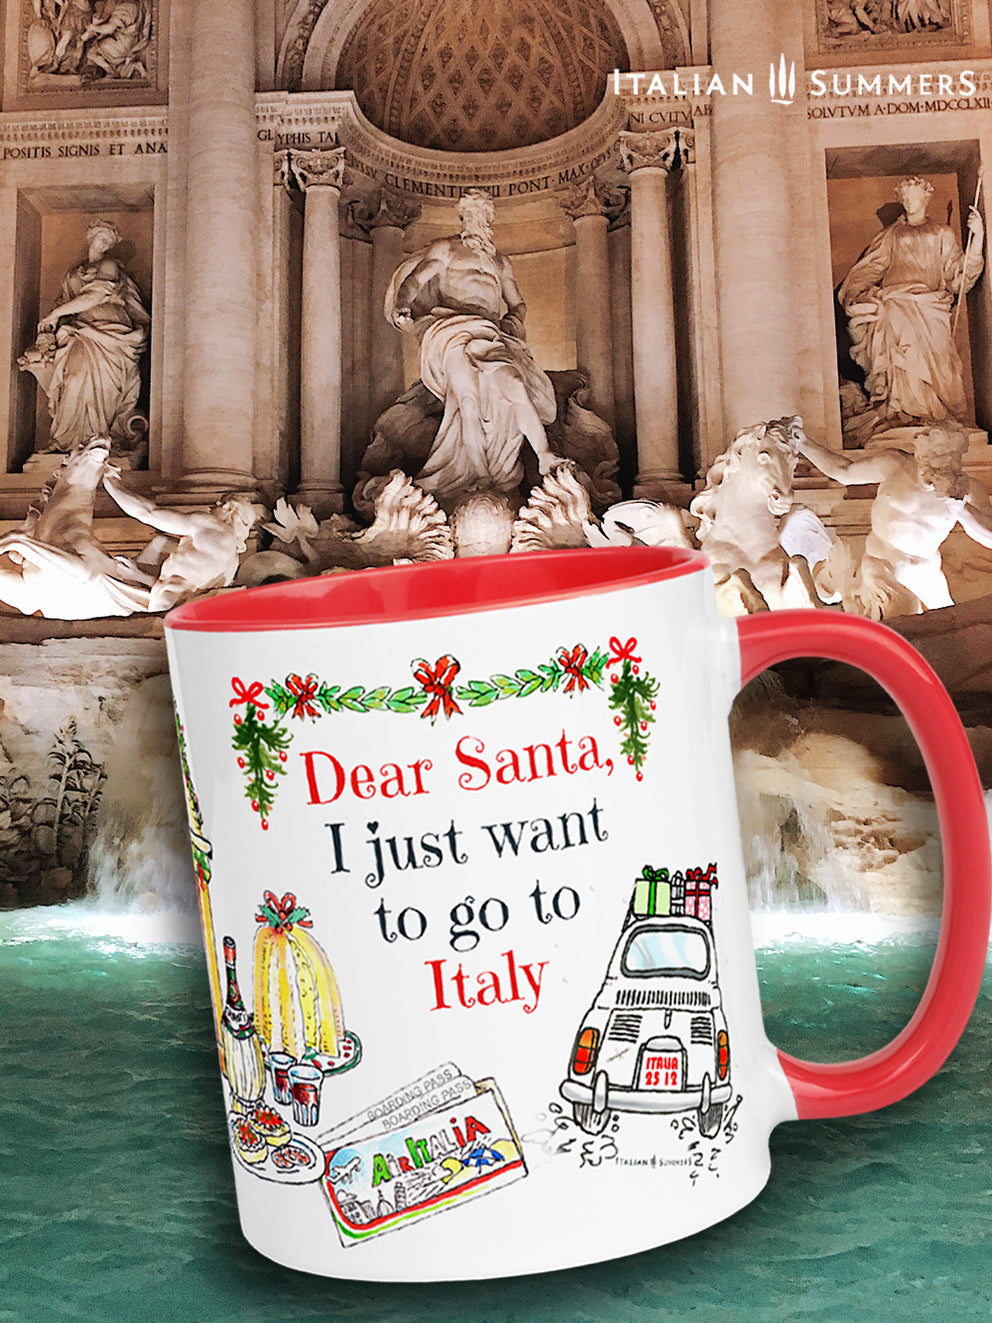 Italy Christmas mug Dear Santa, I just want to go to Italy. This cute mug represents sketches of a vintage Cinquecento seen from the back with presents on the roof, a ticket to Italy, Italian panettone, a book about Italy to cuddle up in front of the fireplace, a flask of good chianti wine, Italian presents and of course our best seller bag "I don't need therapy, I just need to got to Italy". Buon Natale :-)  Made with amore by Italian Summers